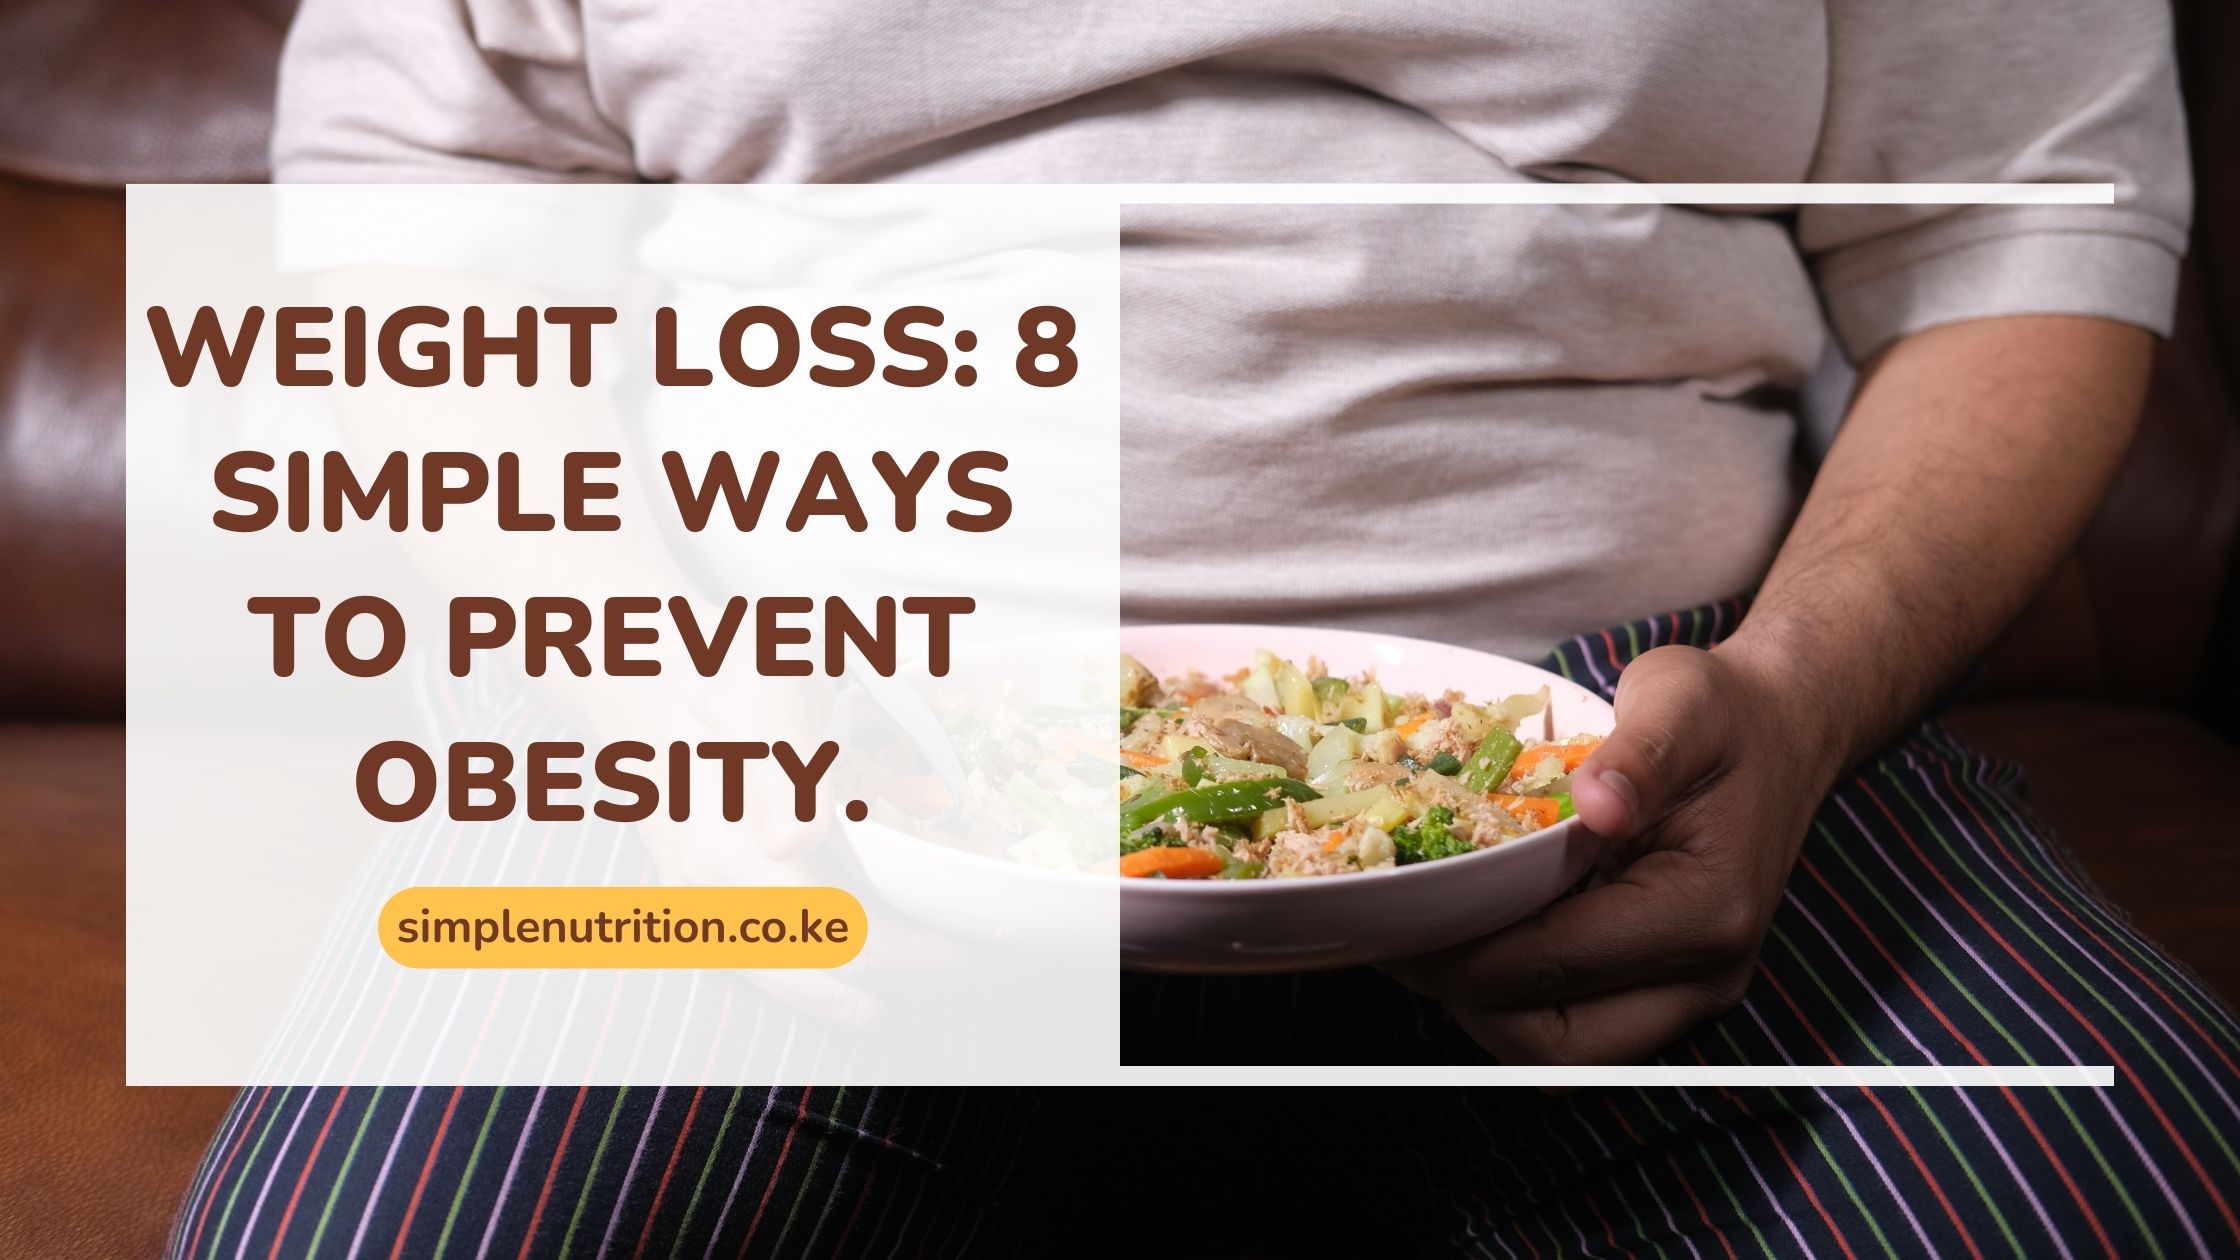 Weight loss: 8 Simple Ways to prevent obesity.